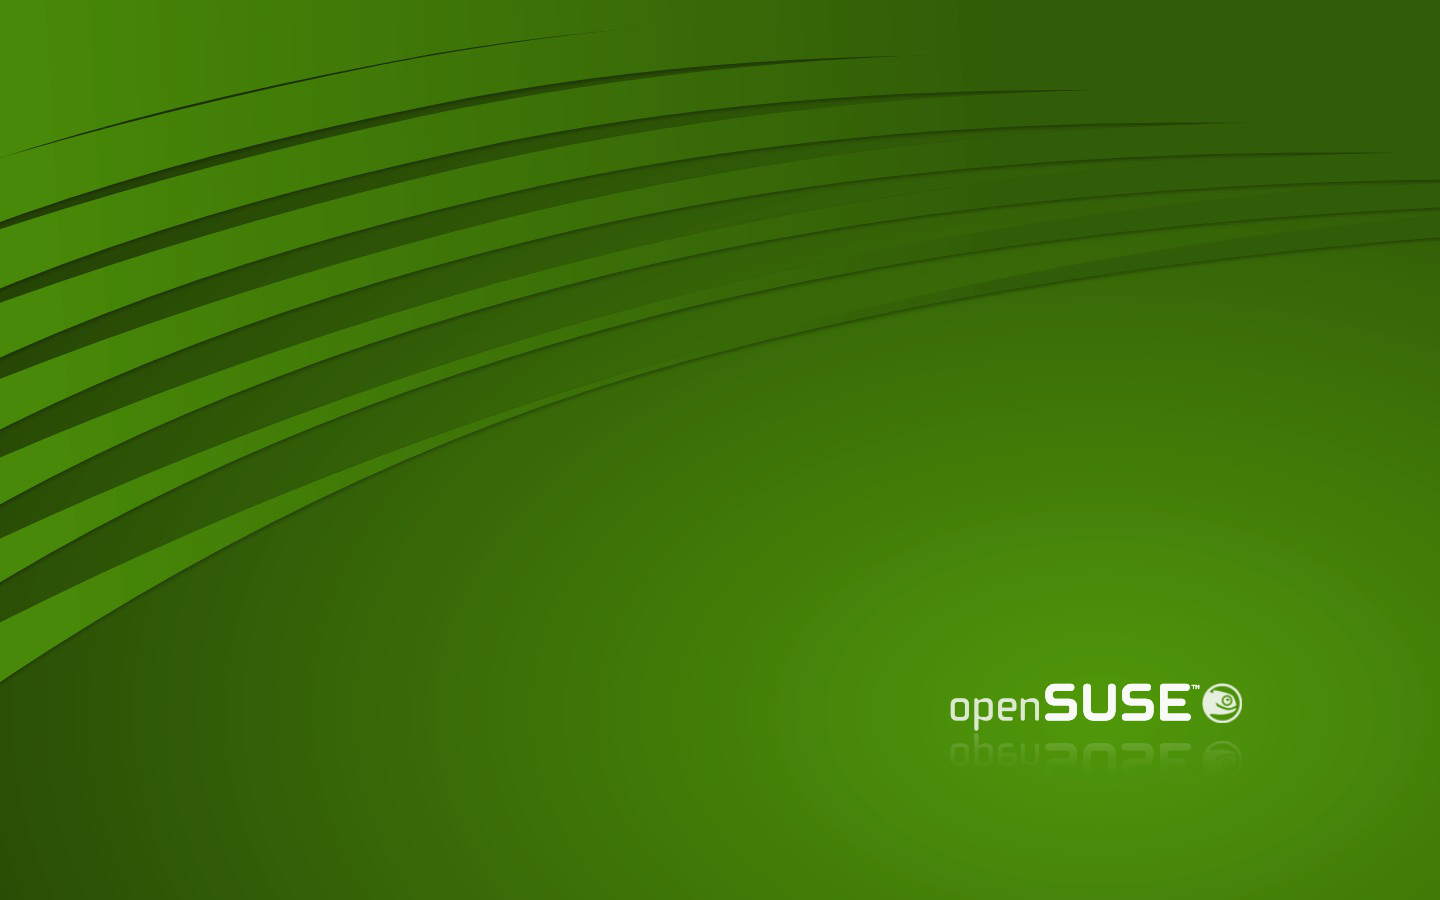 Geous Opensuse Wallpaper